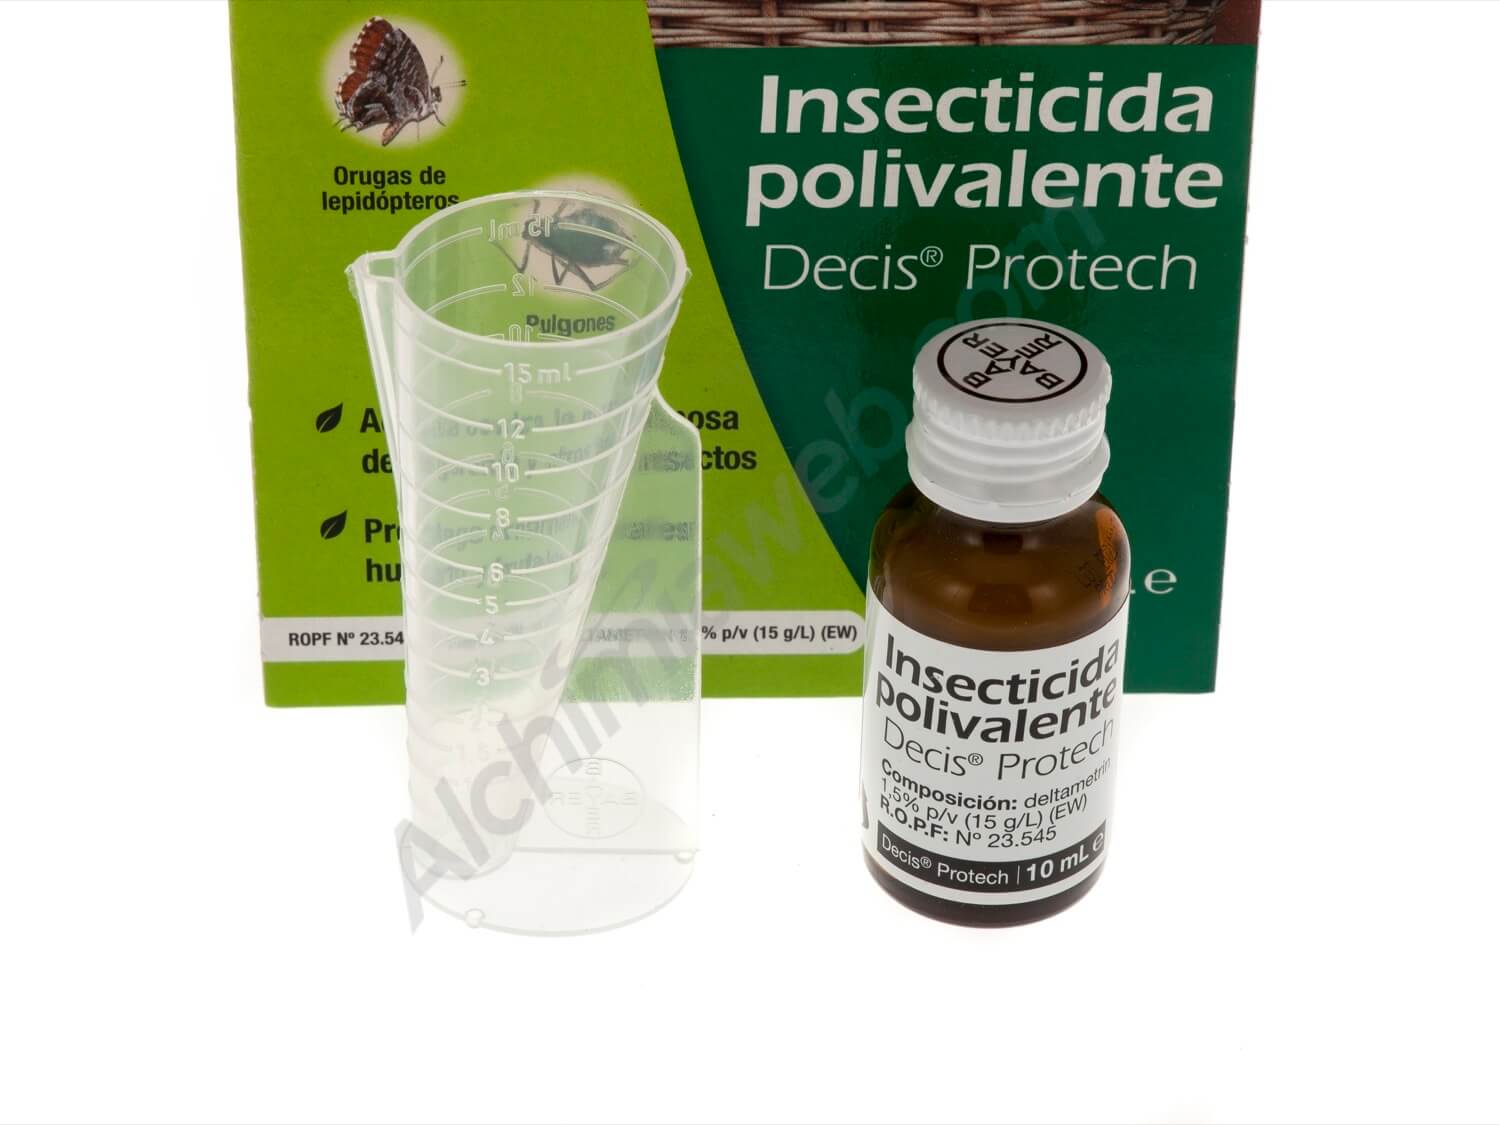 Sale of Bayer Decis Protech Insecticide